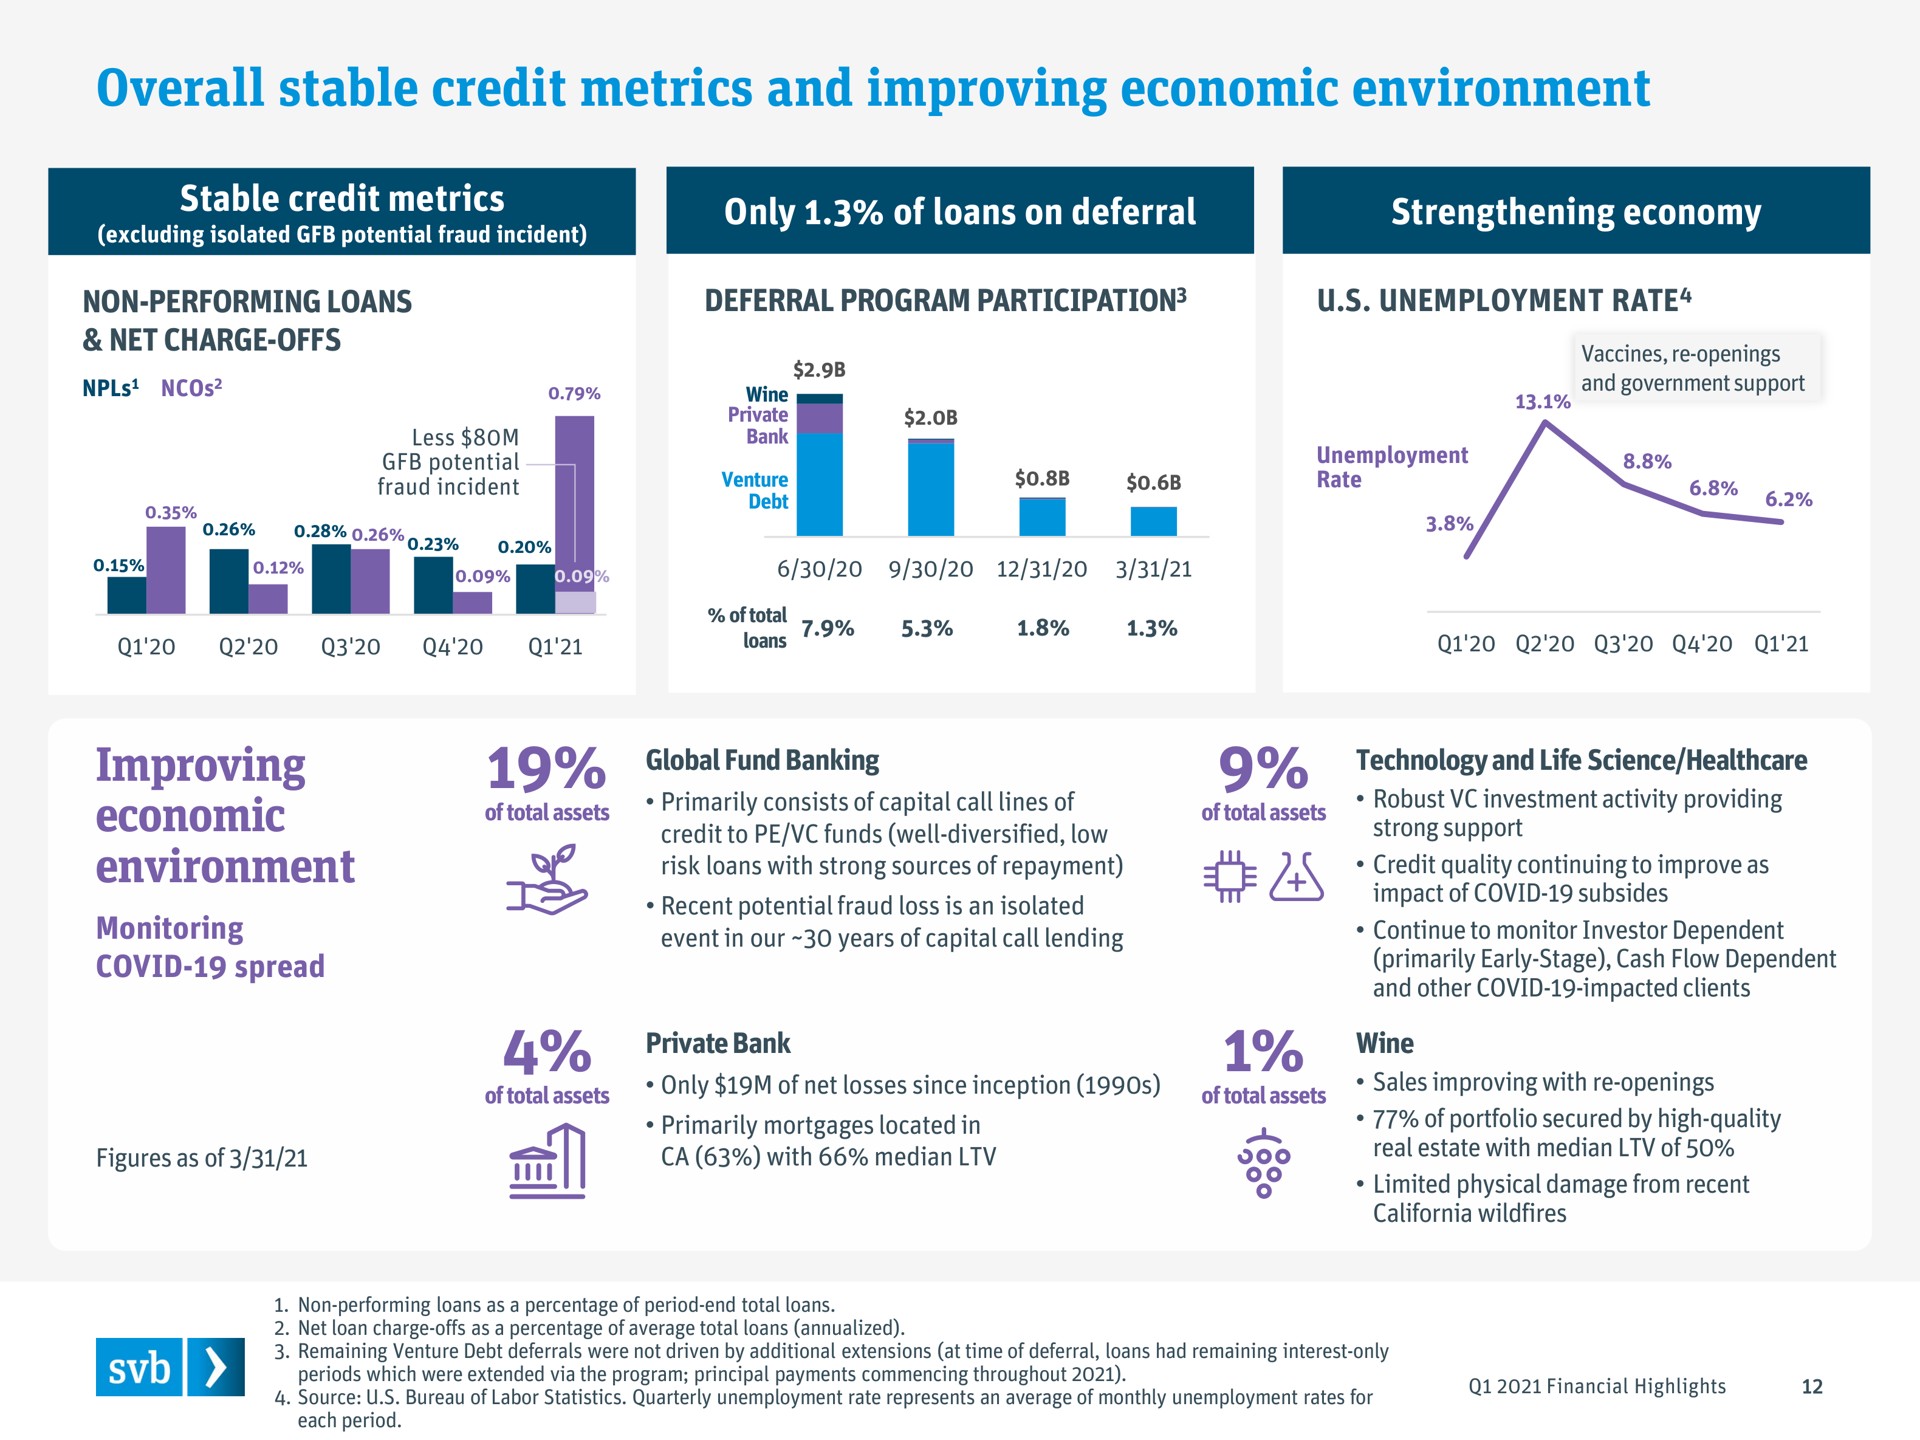 overall stable credit metrics and improving economic environment improving economic environment | Silicon Valley Bank